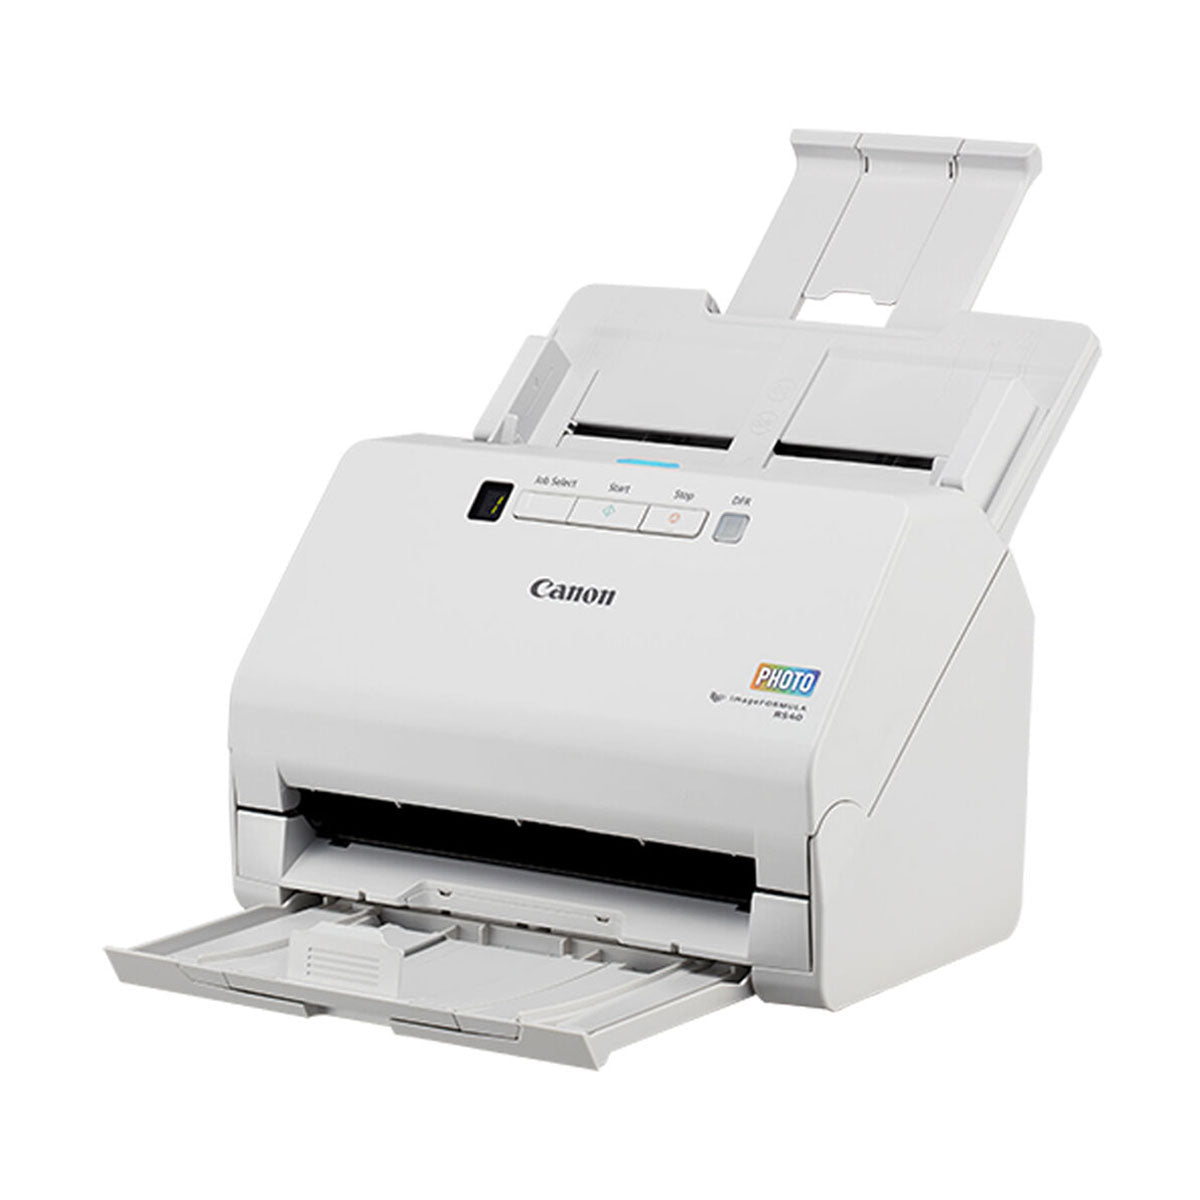 Canon imageFORMULA RS40 Photo and Document Scanner